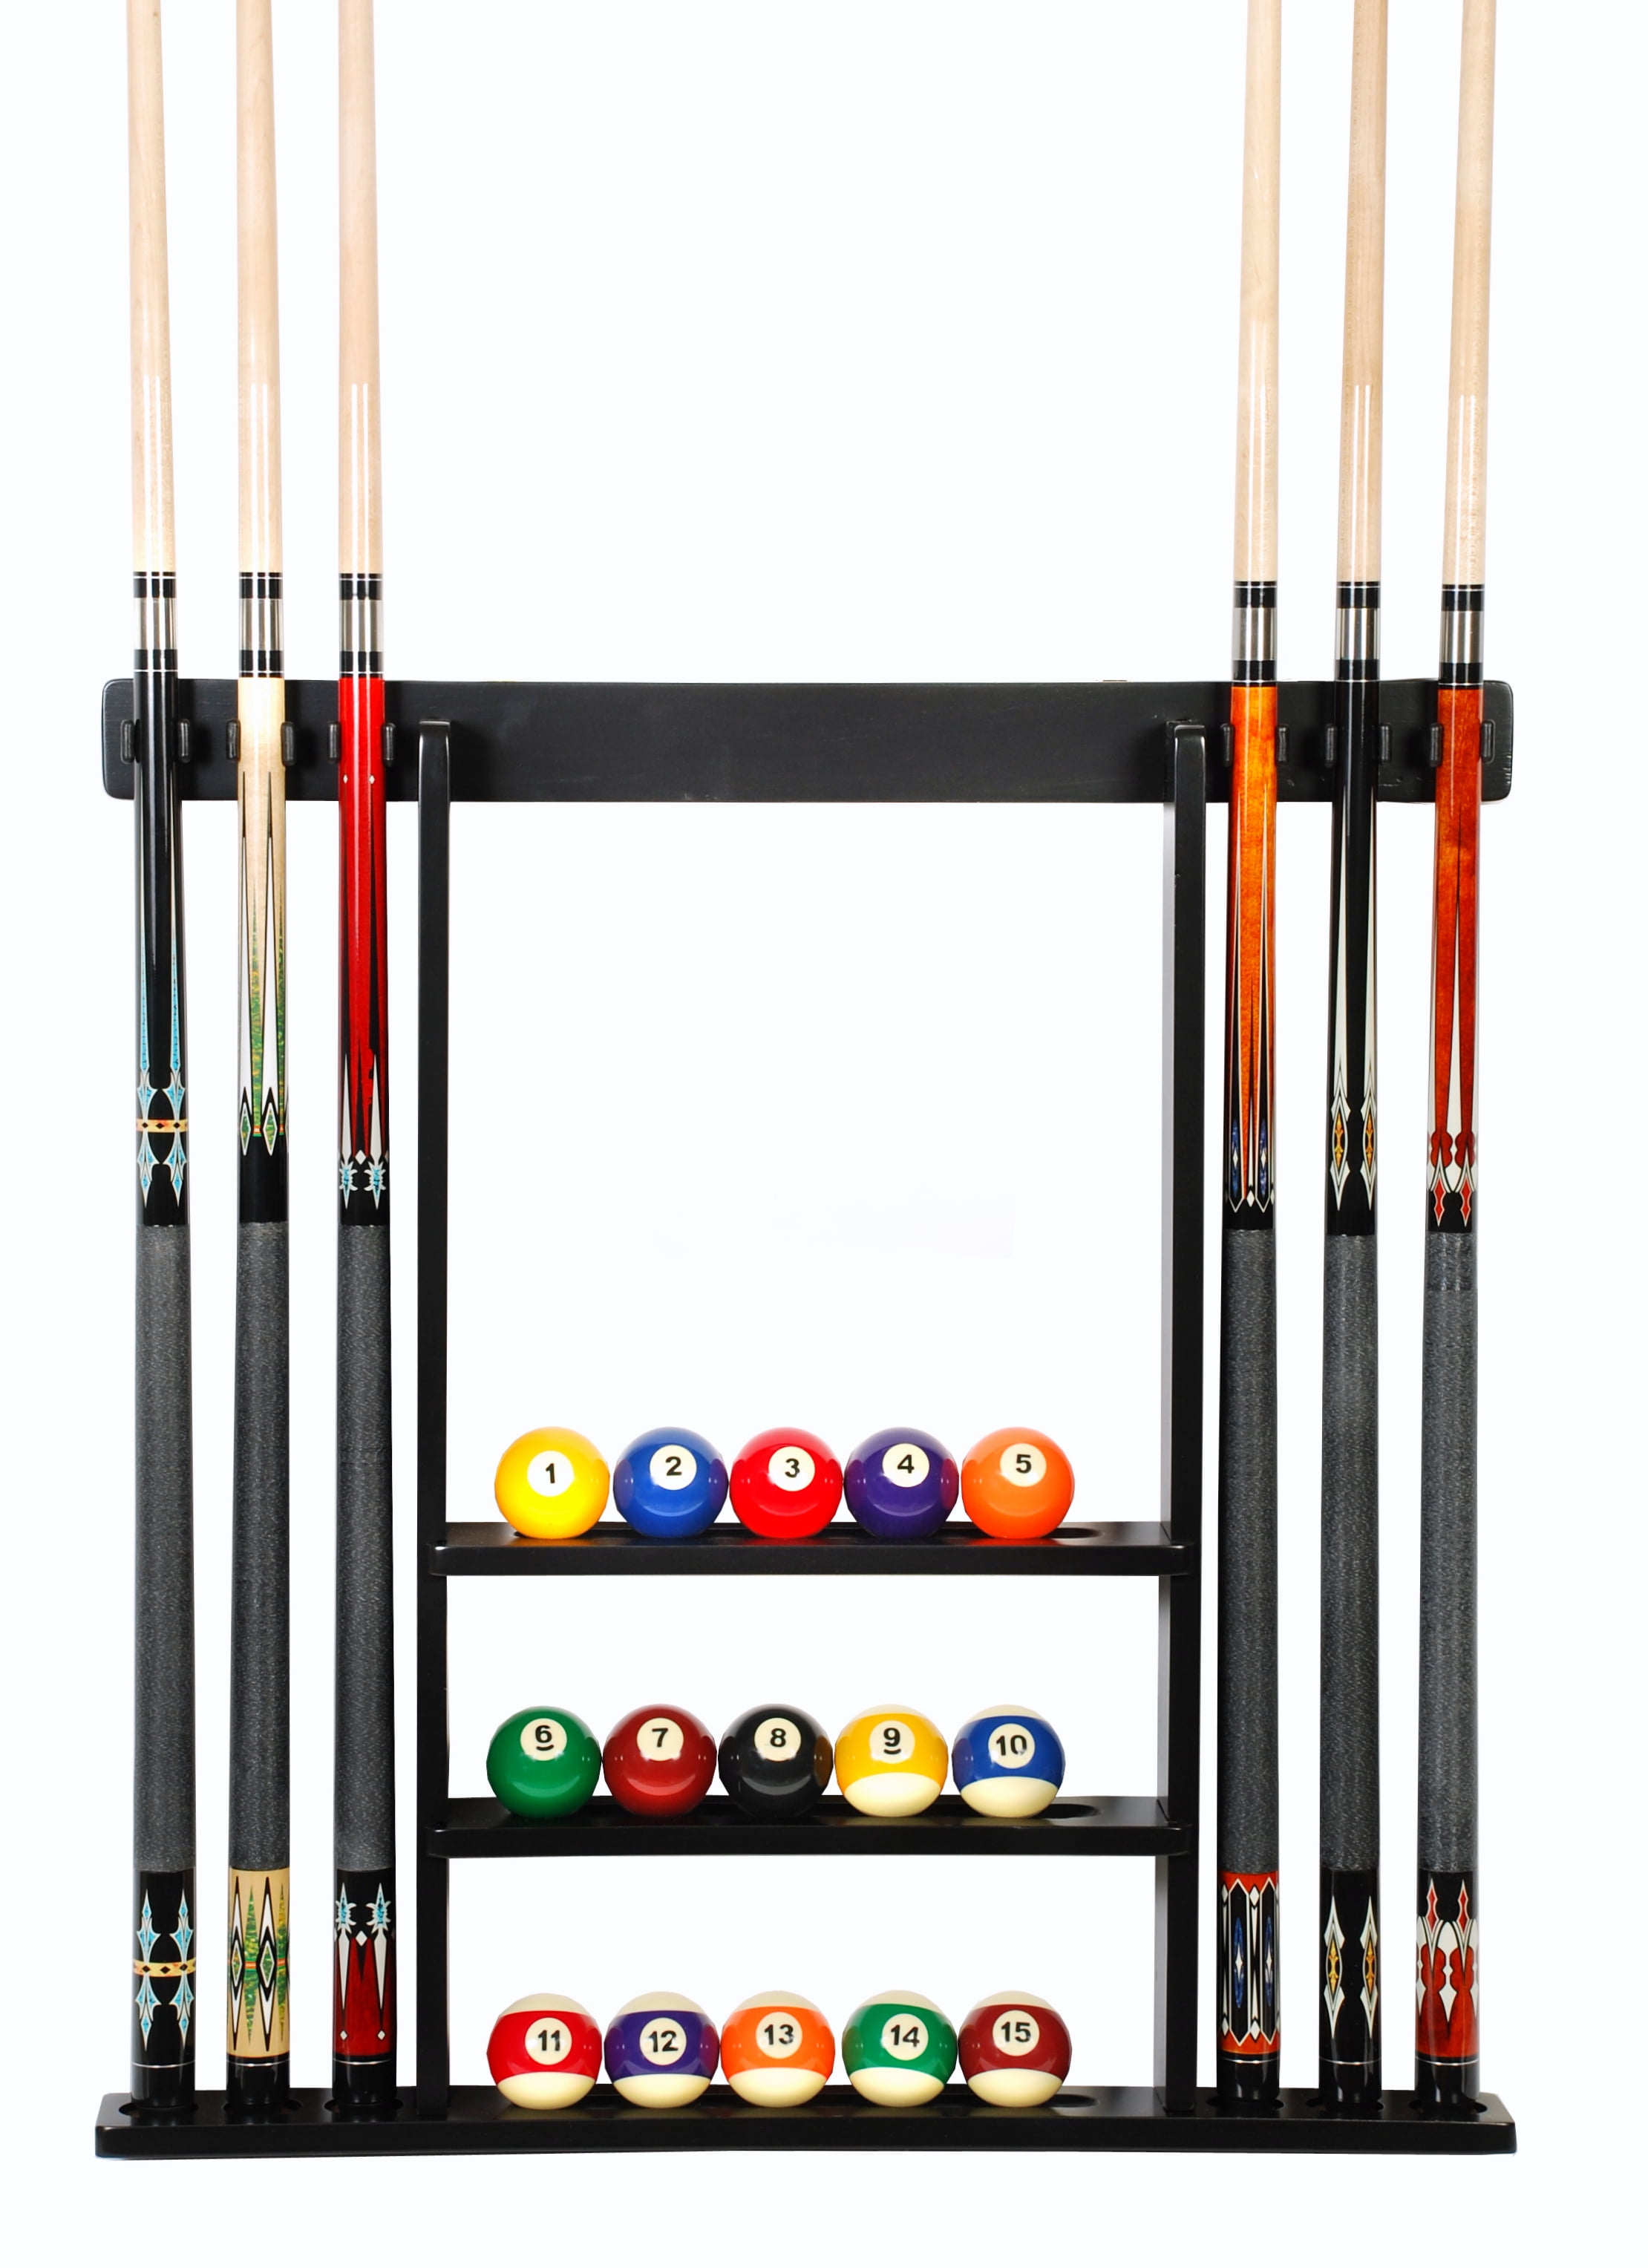 Billiard Cue Stick Details about   6 Pool Cue Rack Black Finished Wall Cue Rack FREE SHIP 